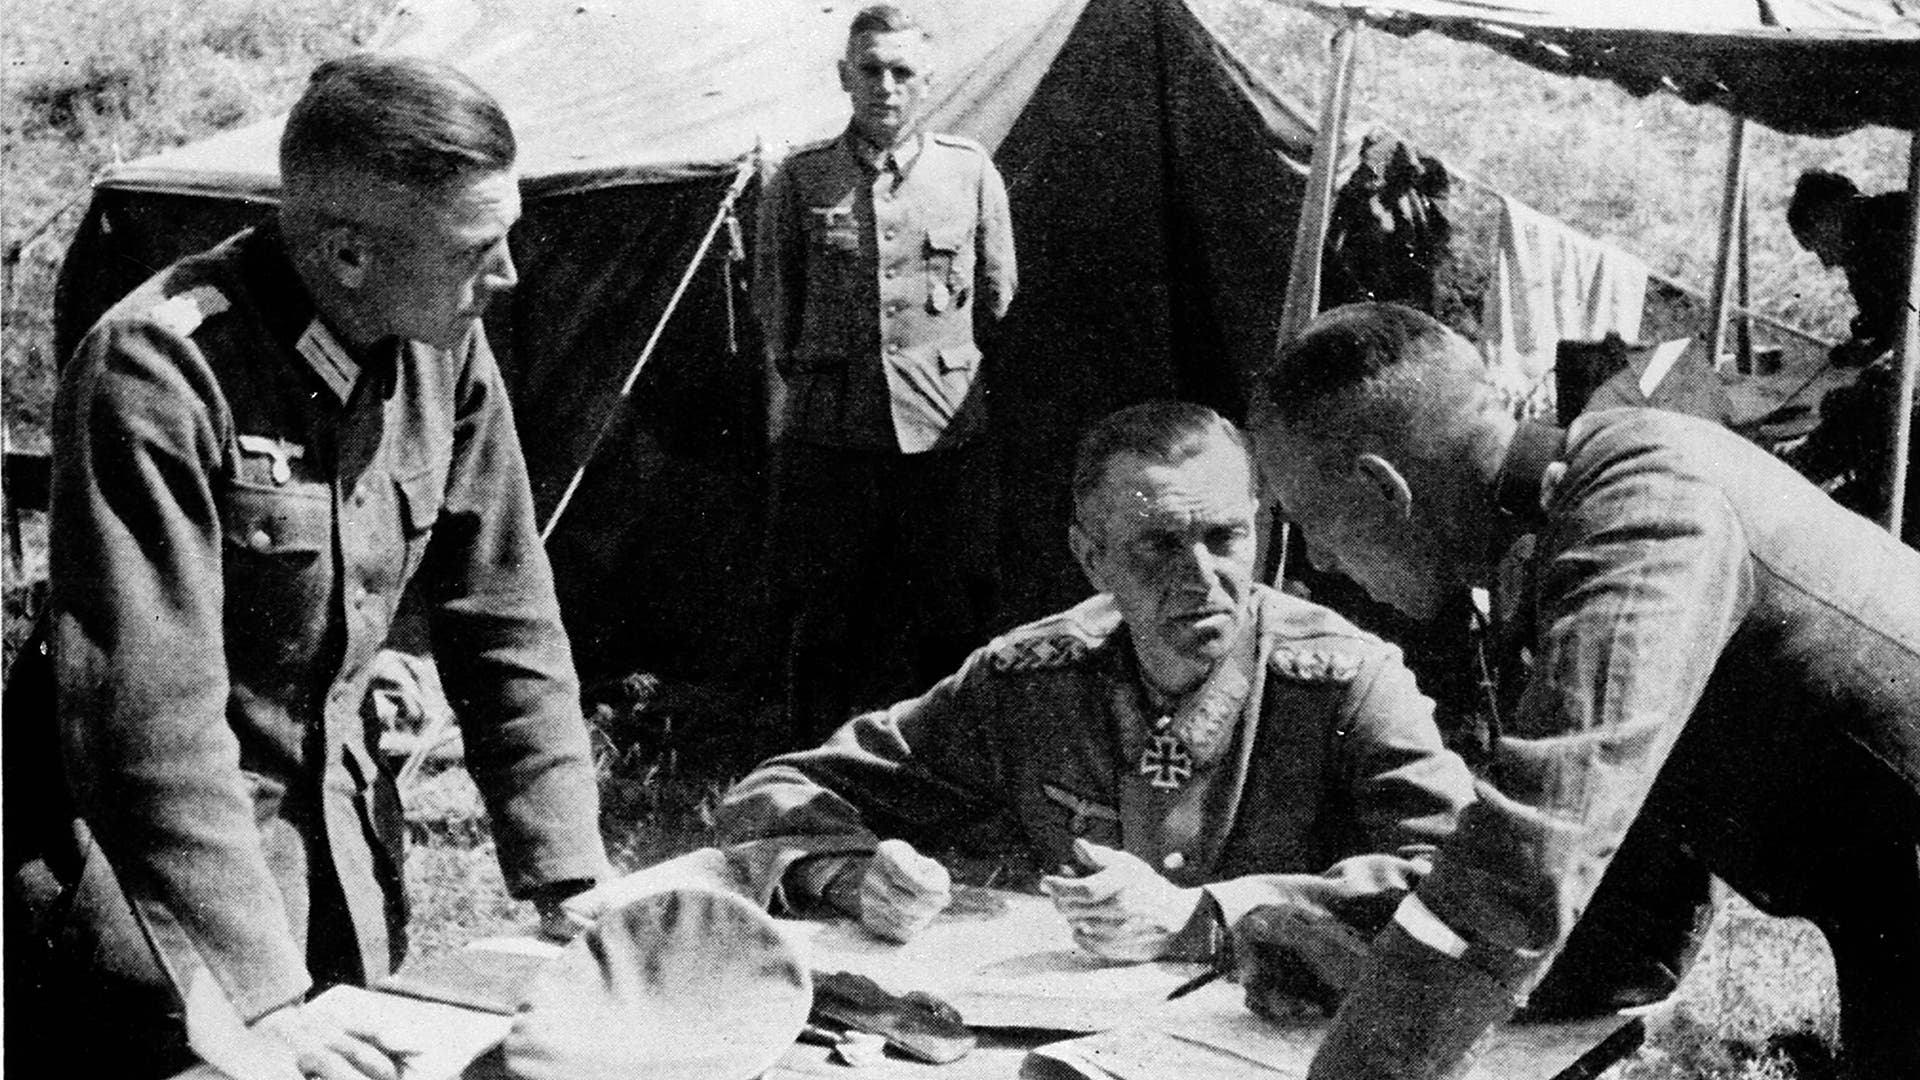 German General Friedrich Paulus (seated) confers with his staff of the VIth army in front of Stalingrad, September 1, 1942.